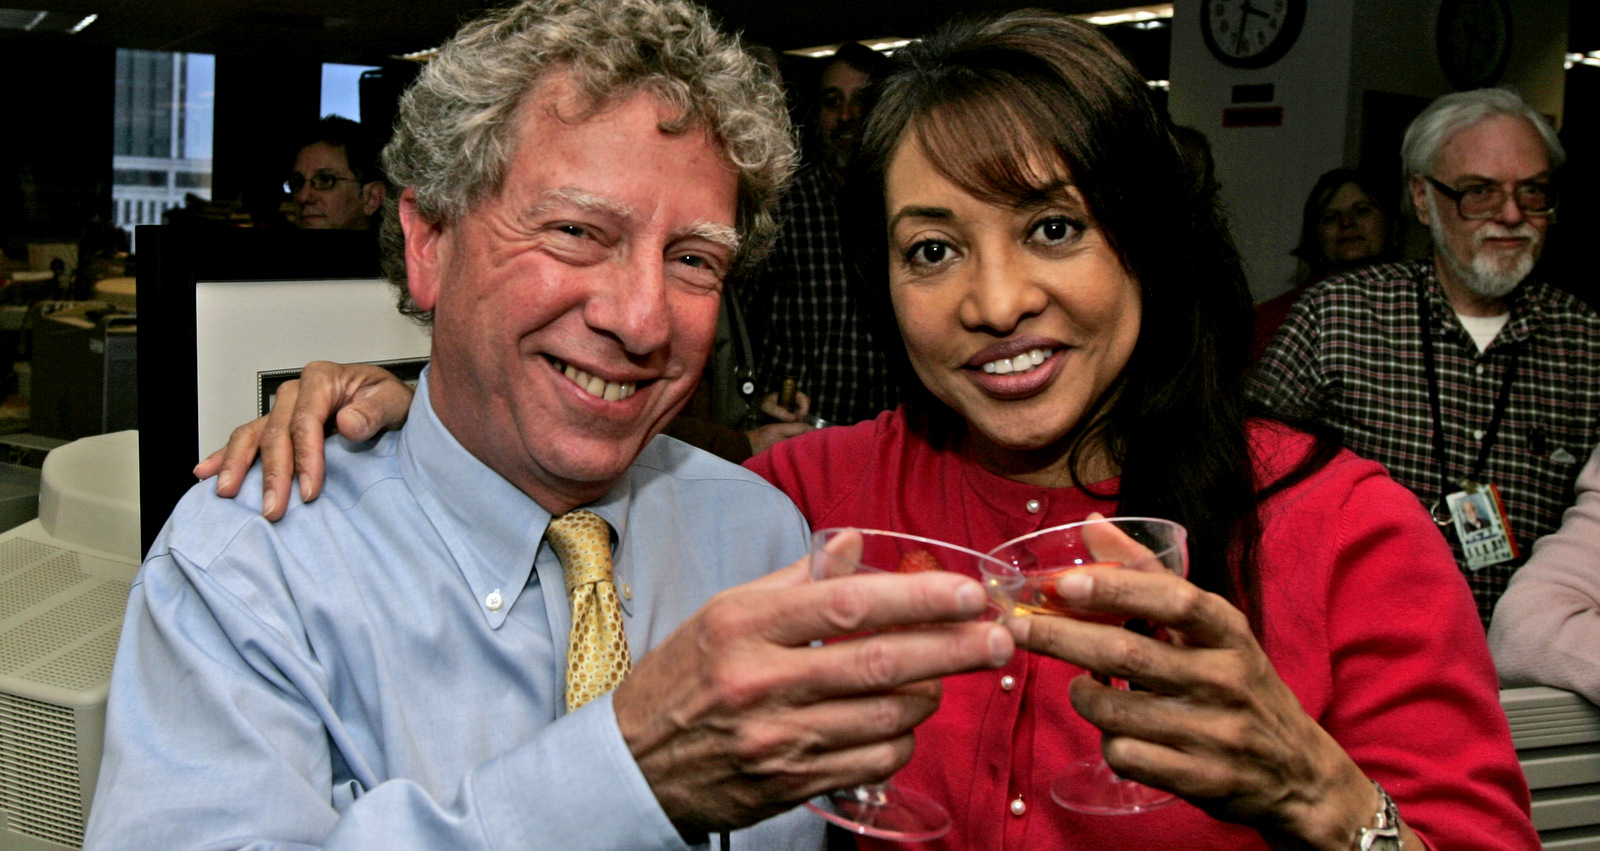 Hank Klibanoff, managing editor of The Atlanta Journal-Constitution, and editorial page editor Cynthia Tucker celebrate in the newsroom Monday, April 16, 2007, after it was announced that they won the 2007 Pulitzer Prize for history and commentary. (AP/John Bazemore)